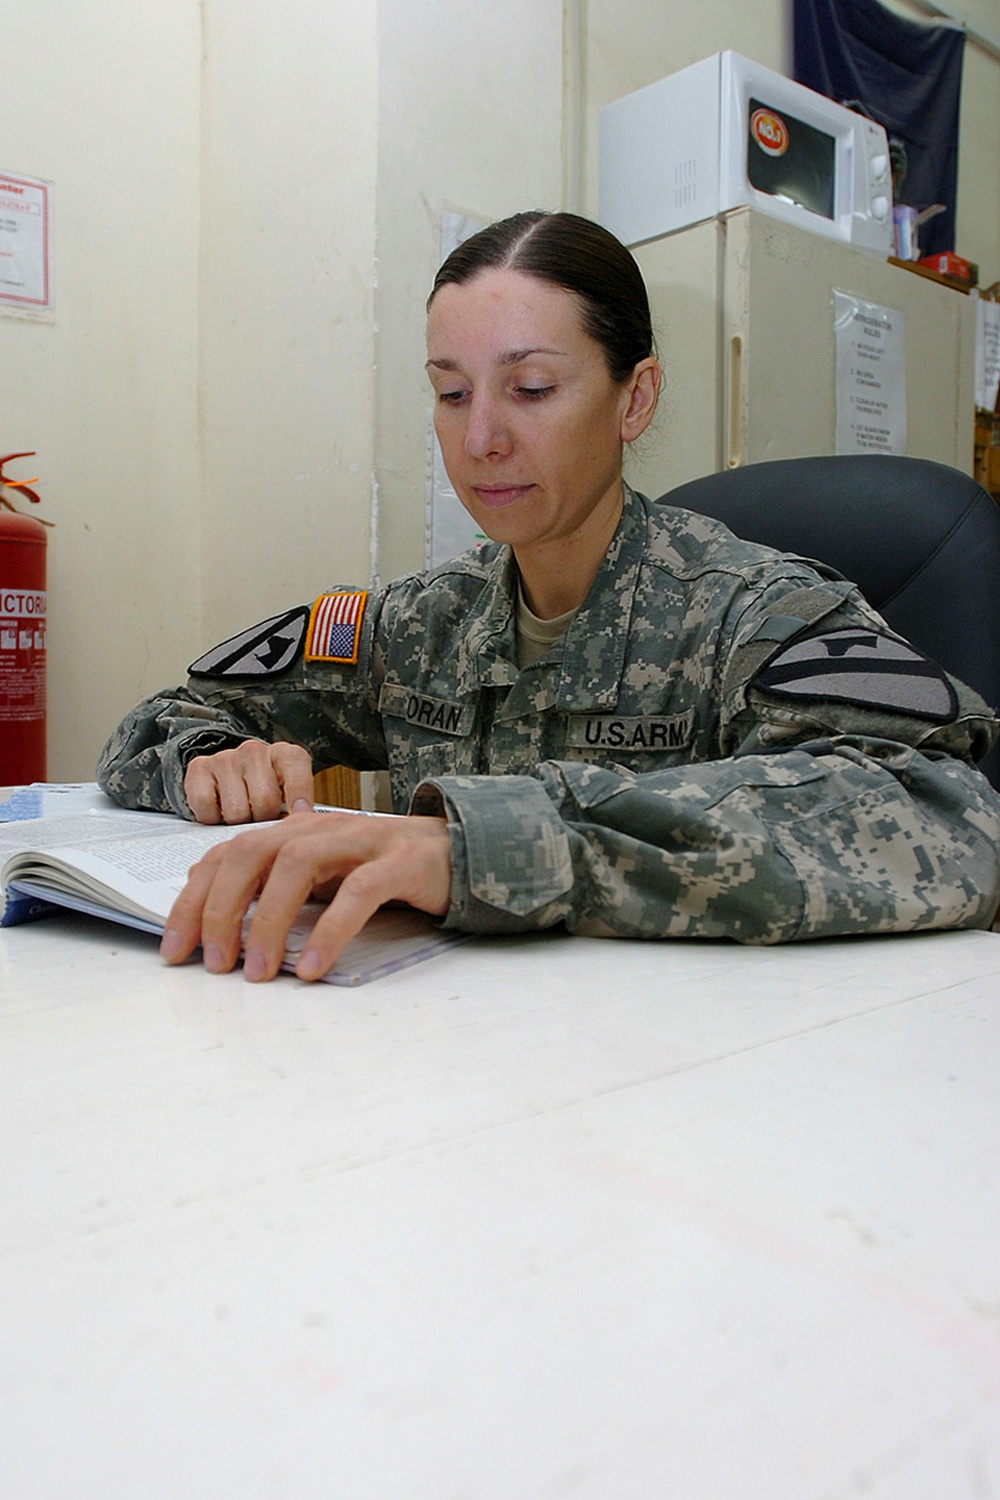 Aviation troop finds opportunities in America, Army